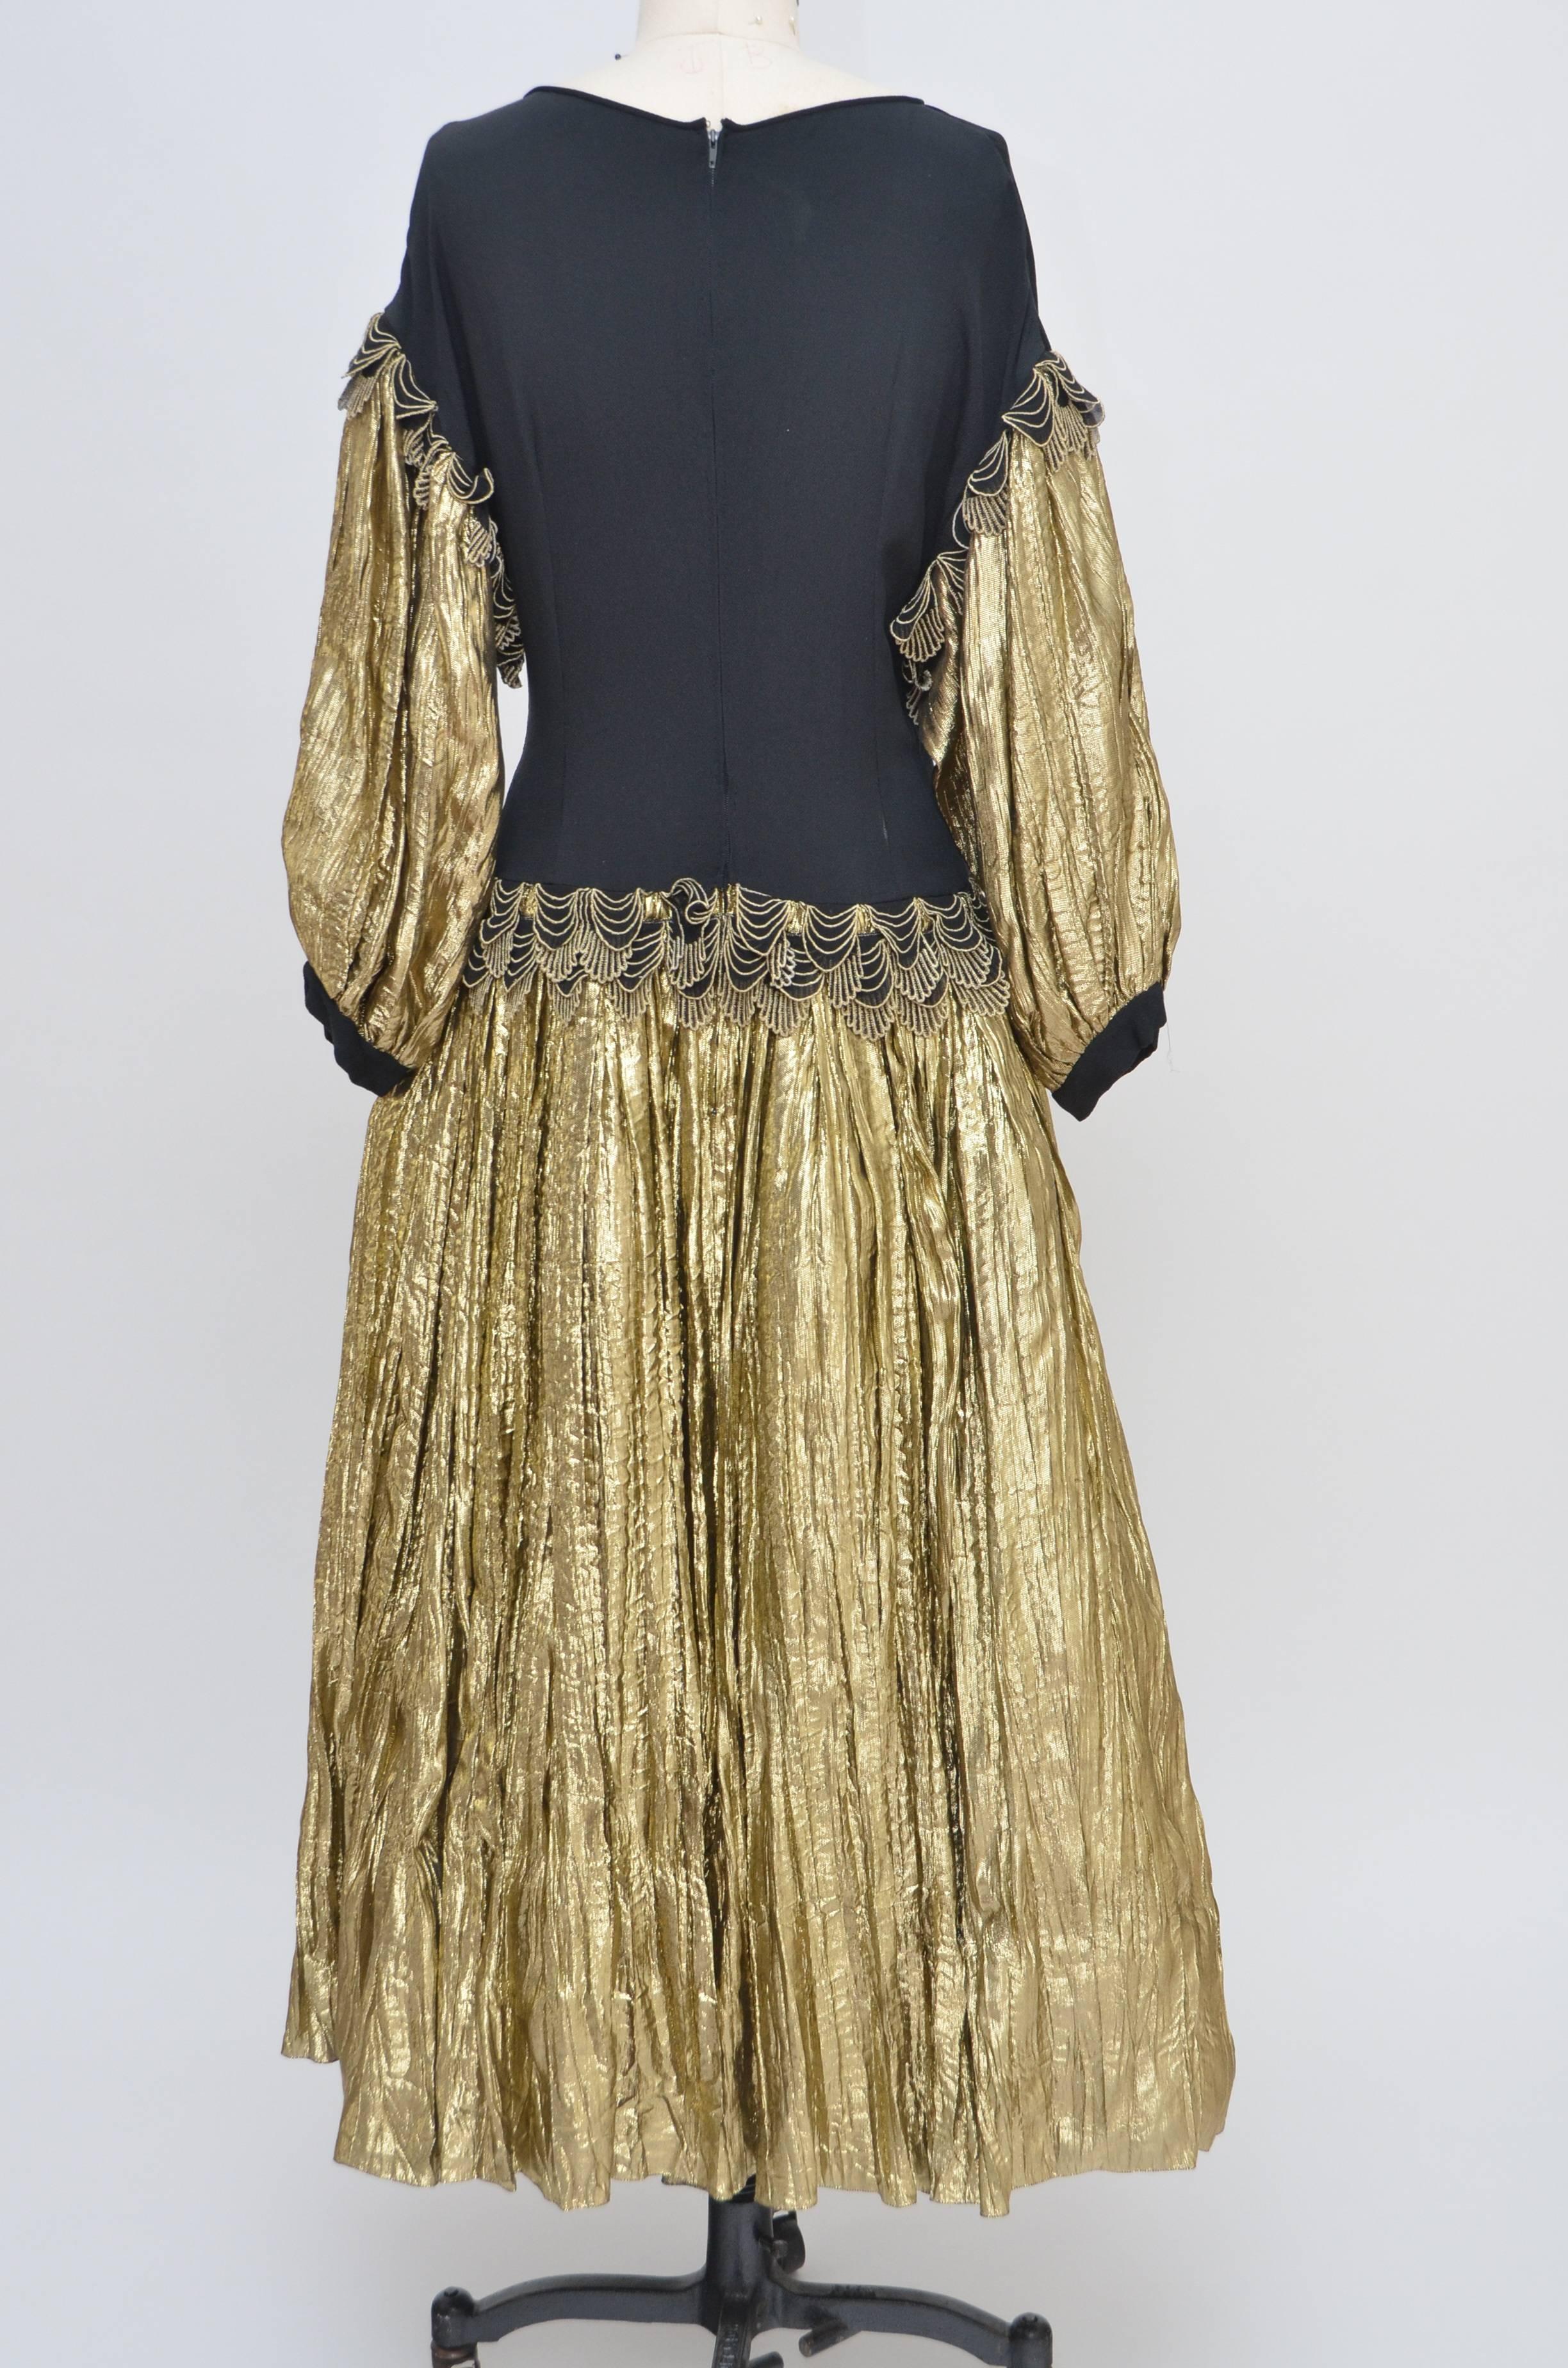 Chloe by Karl Lagerfeld gold lame dress for 1970's -'80
Very good condition.

Made in France.
FINAL SALE
